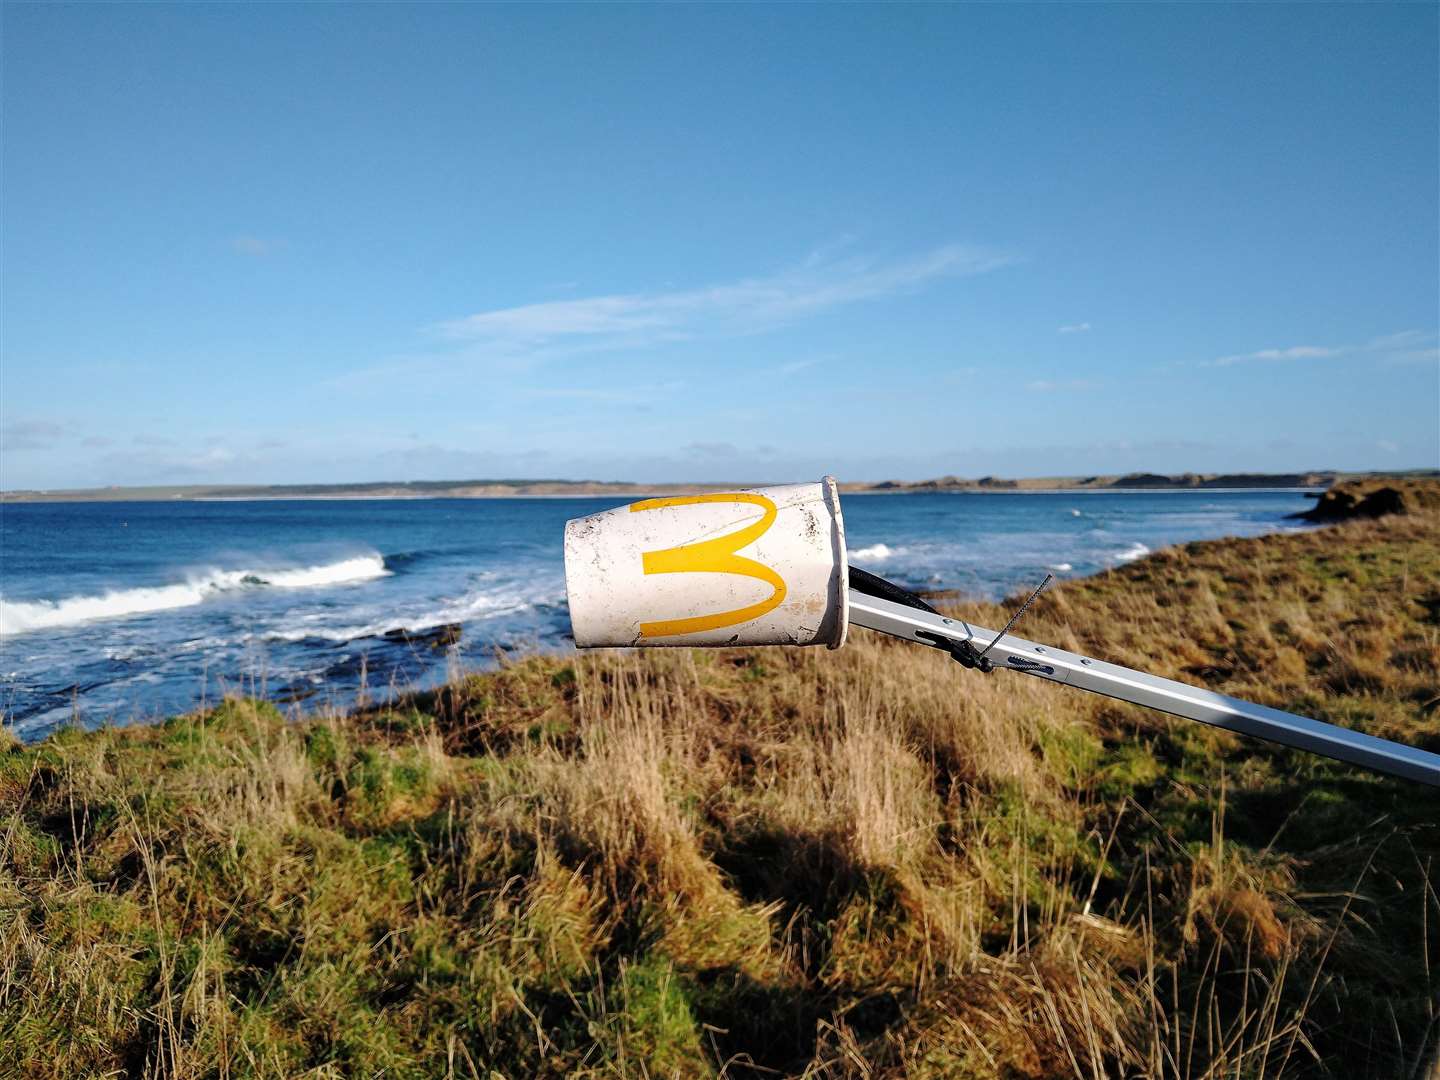 A cup from a McDonald's fast-food outlet was found at a beach near Castletown. The nearest McDonald's restaurant is over 100 miles away.